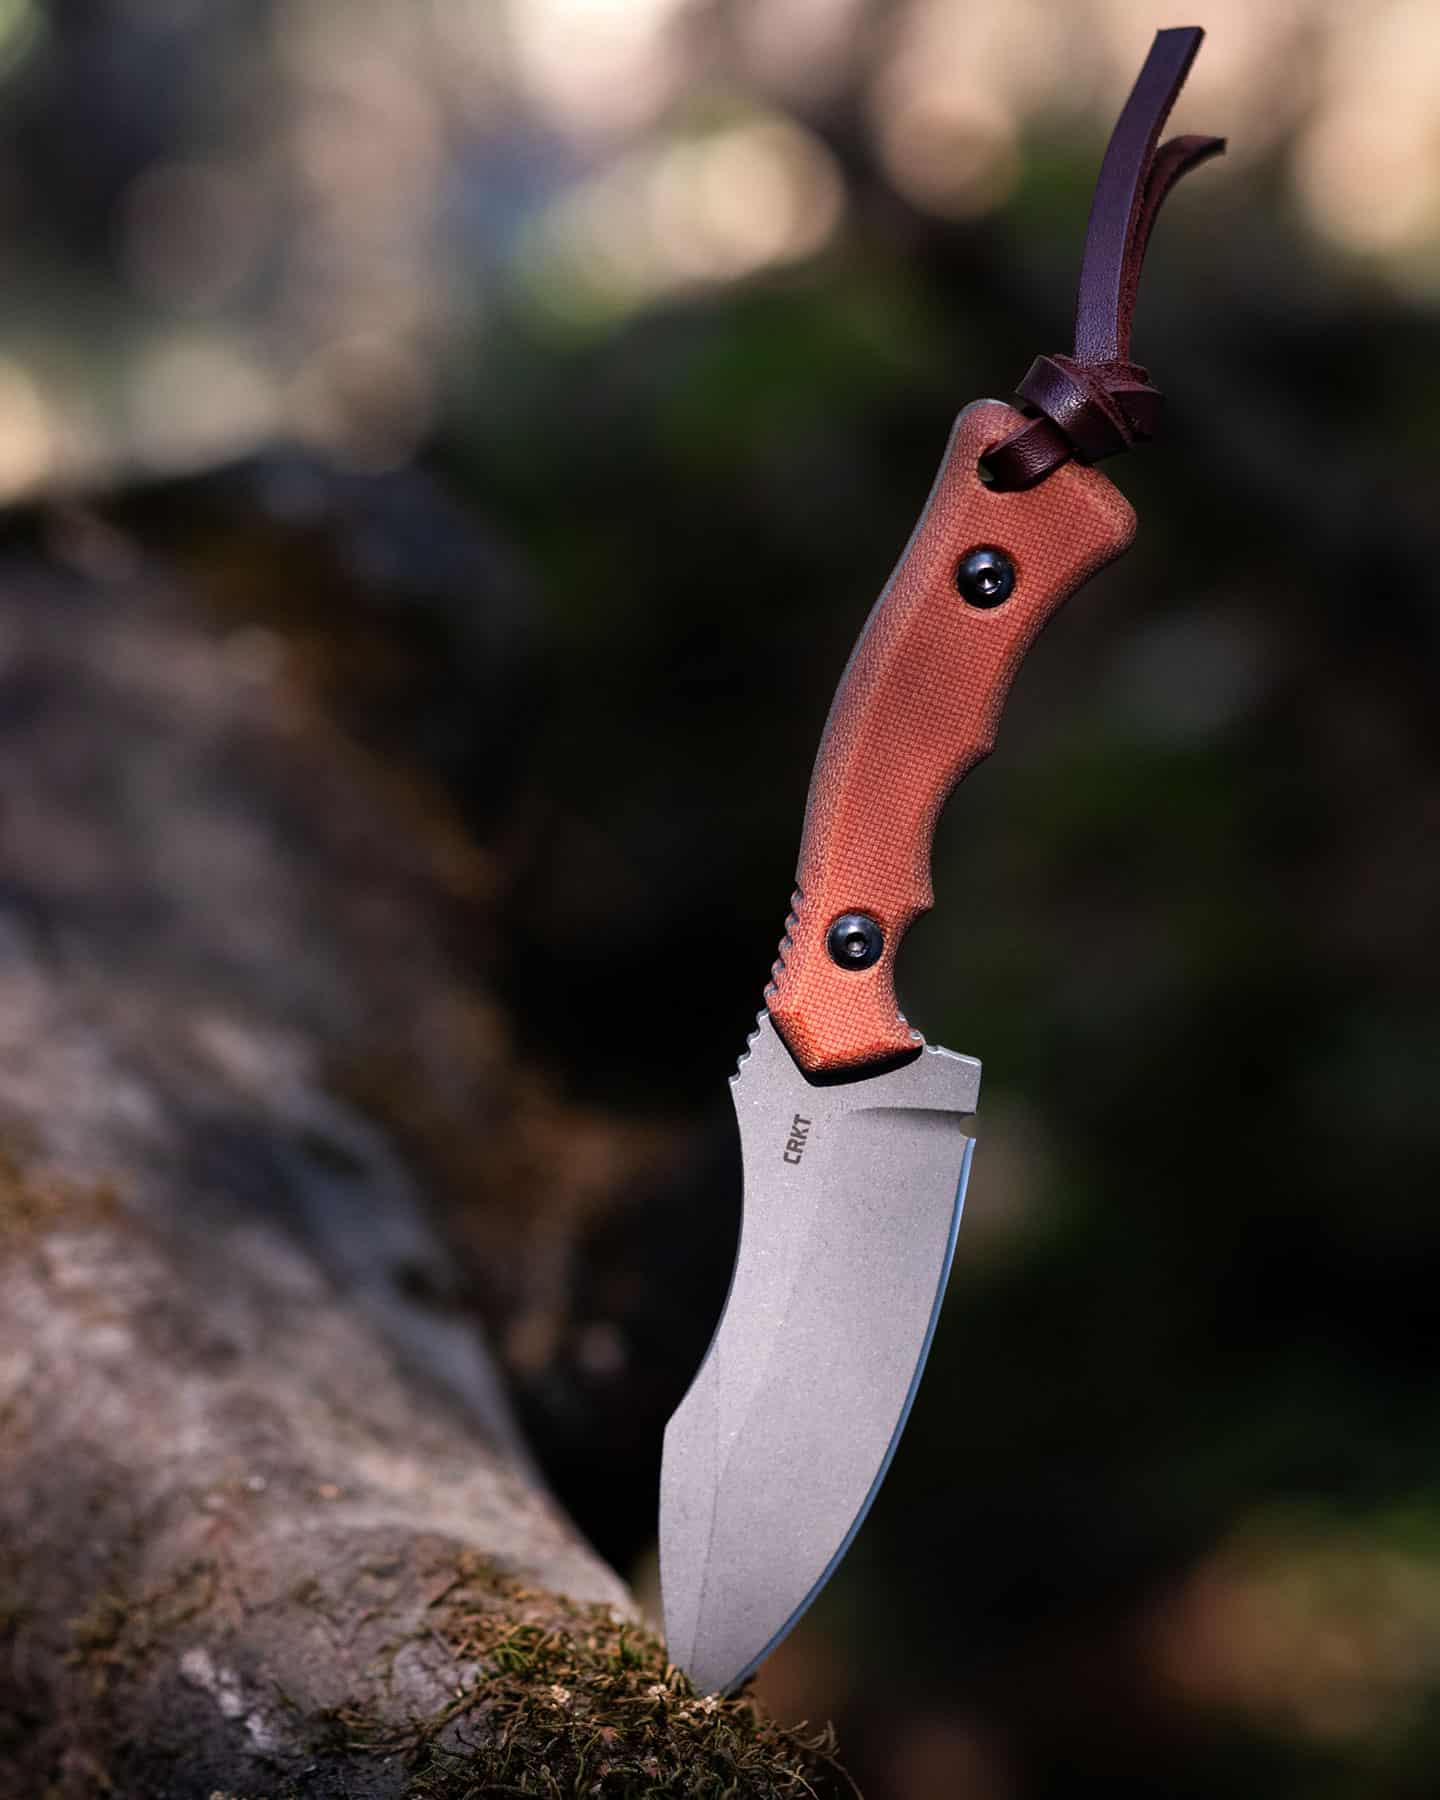 The CRKT Bugsy is a compact survival bushcraft knife hybrid that is wilderness ready.